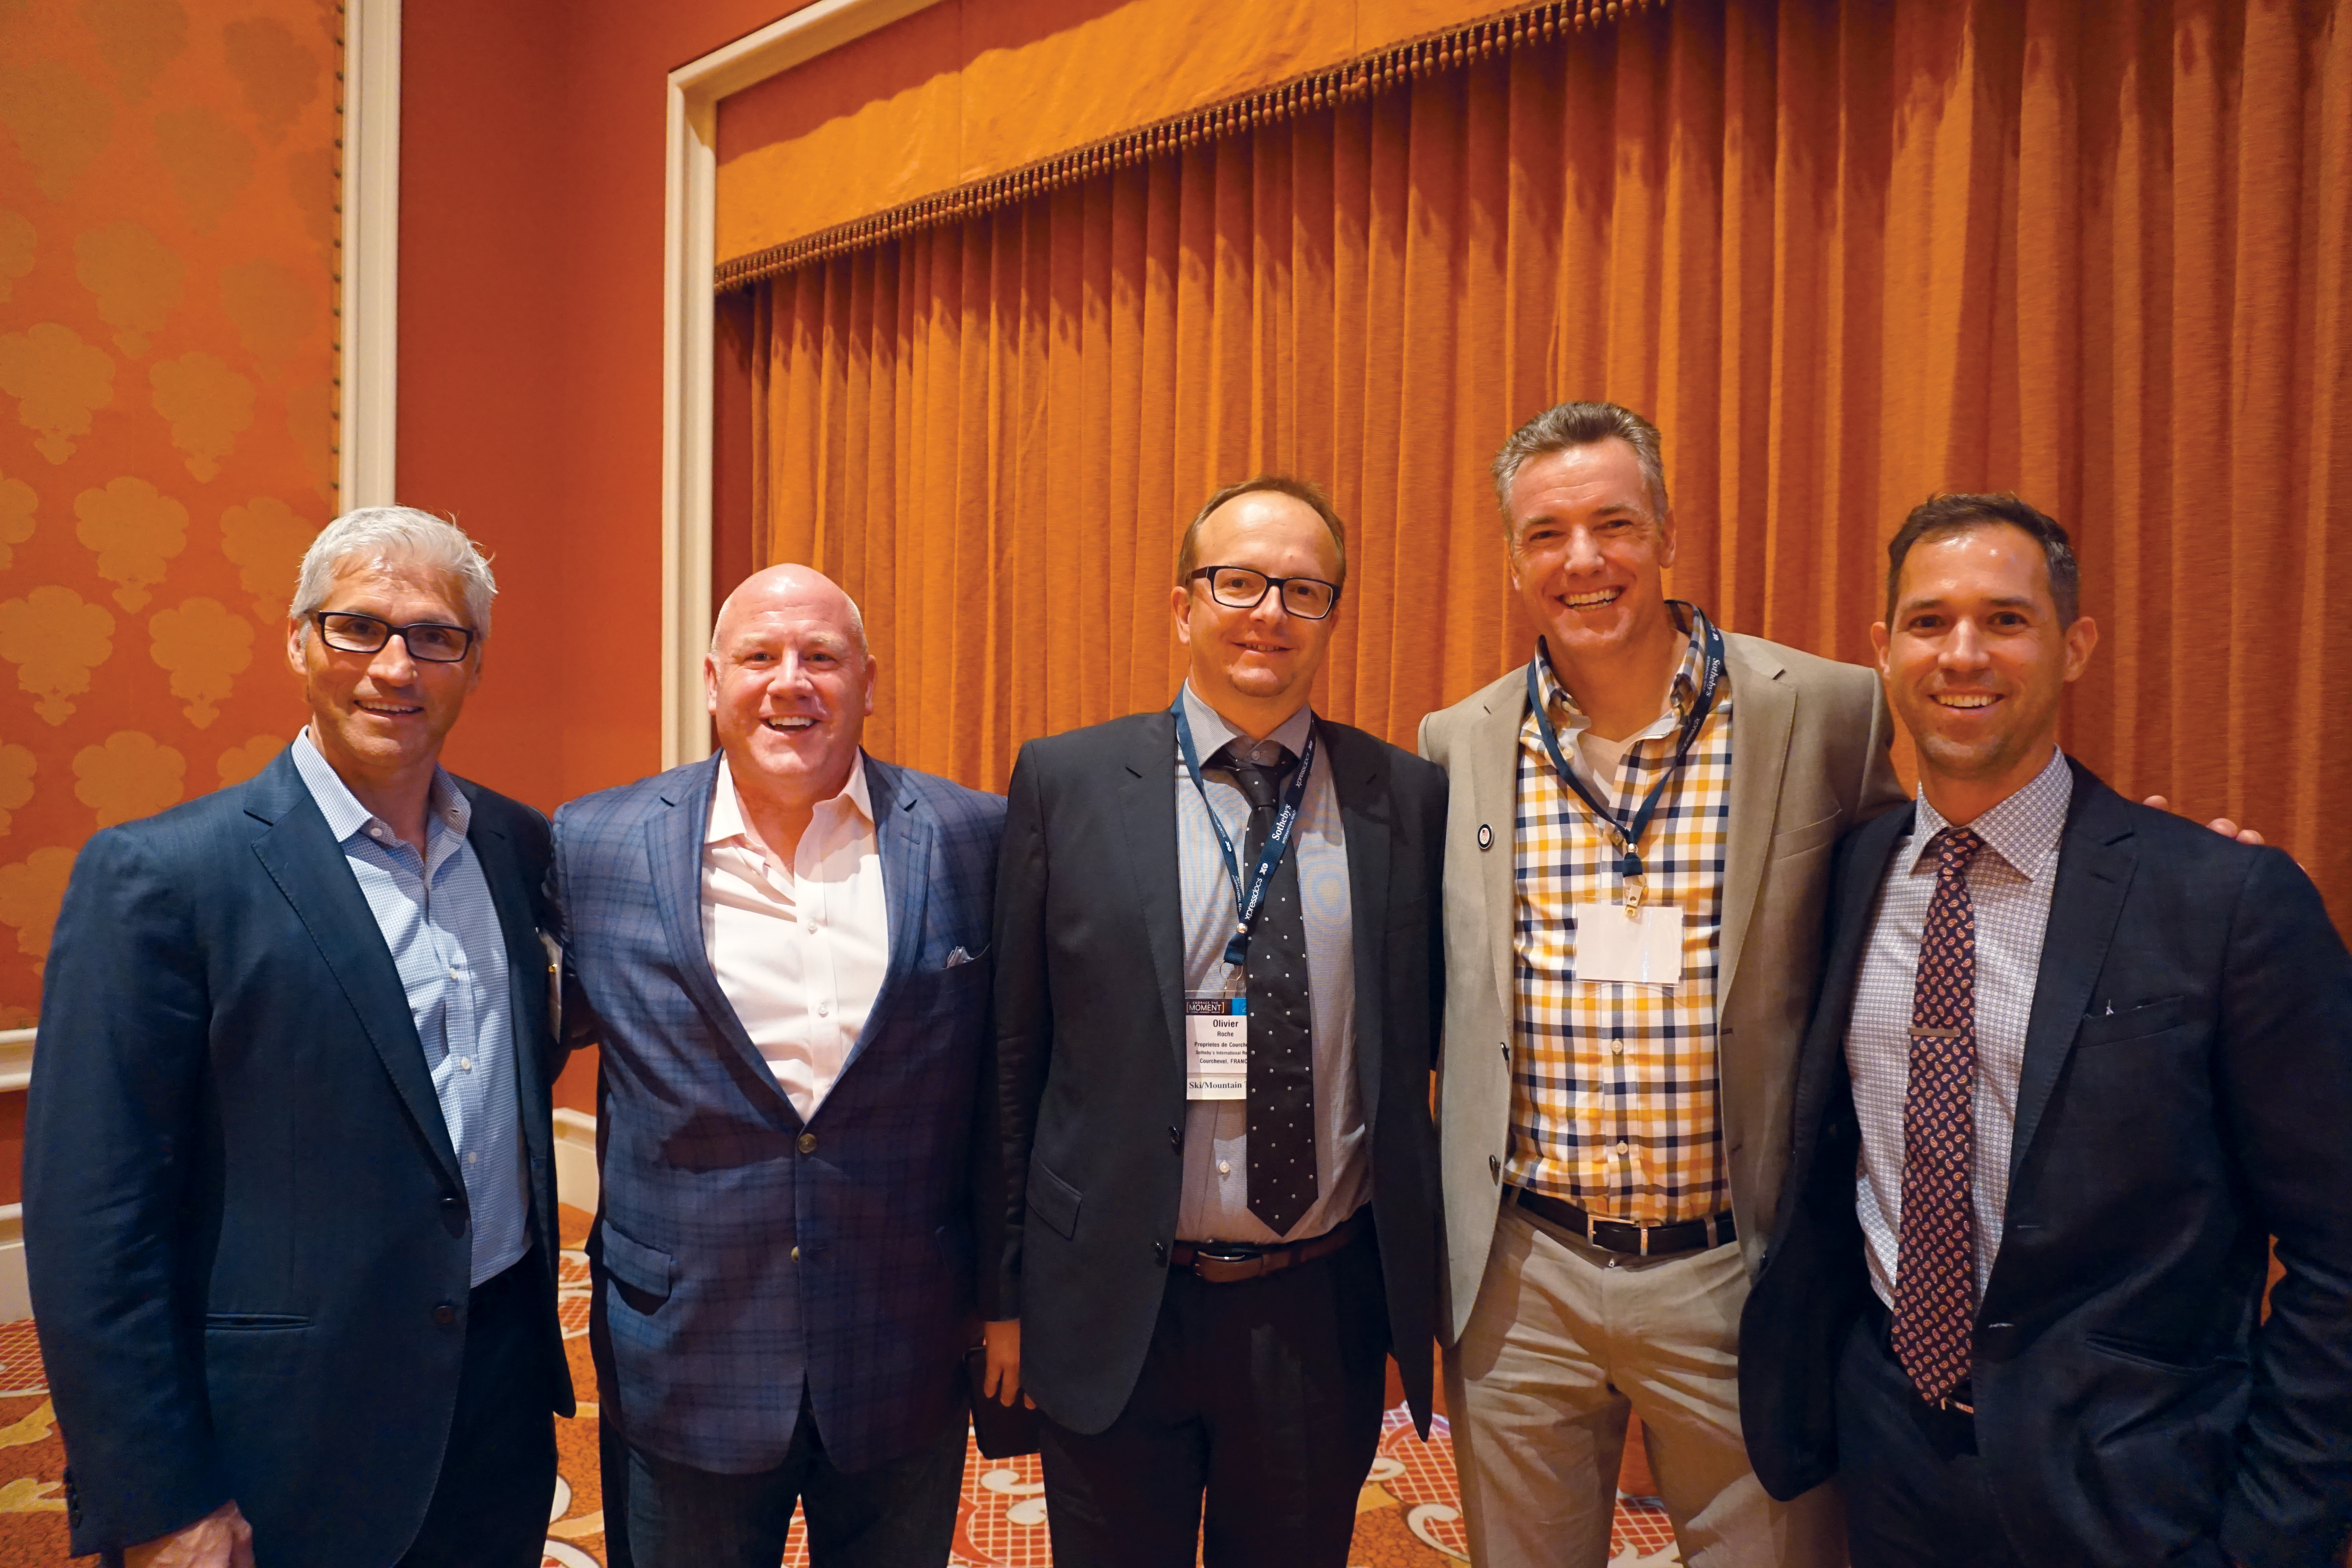 Tye Stockton, LIV Sotheby's International Realty (left), and other panelists of the Ski Mountain Town Sphere at the 2016 Global Networking Event.